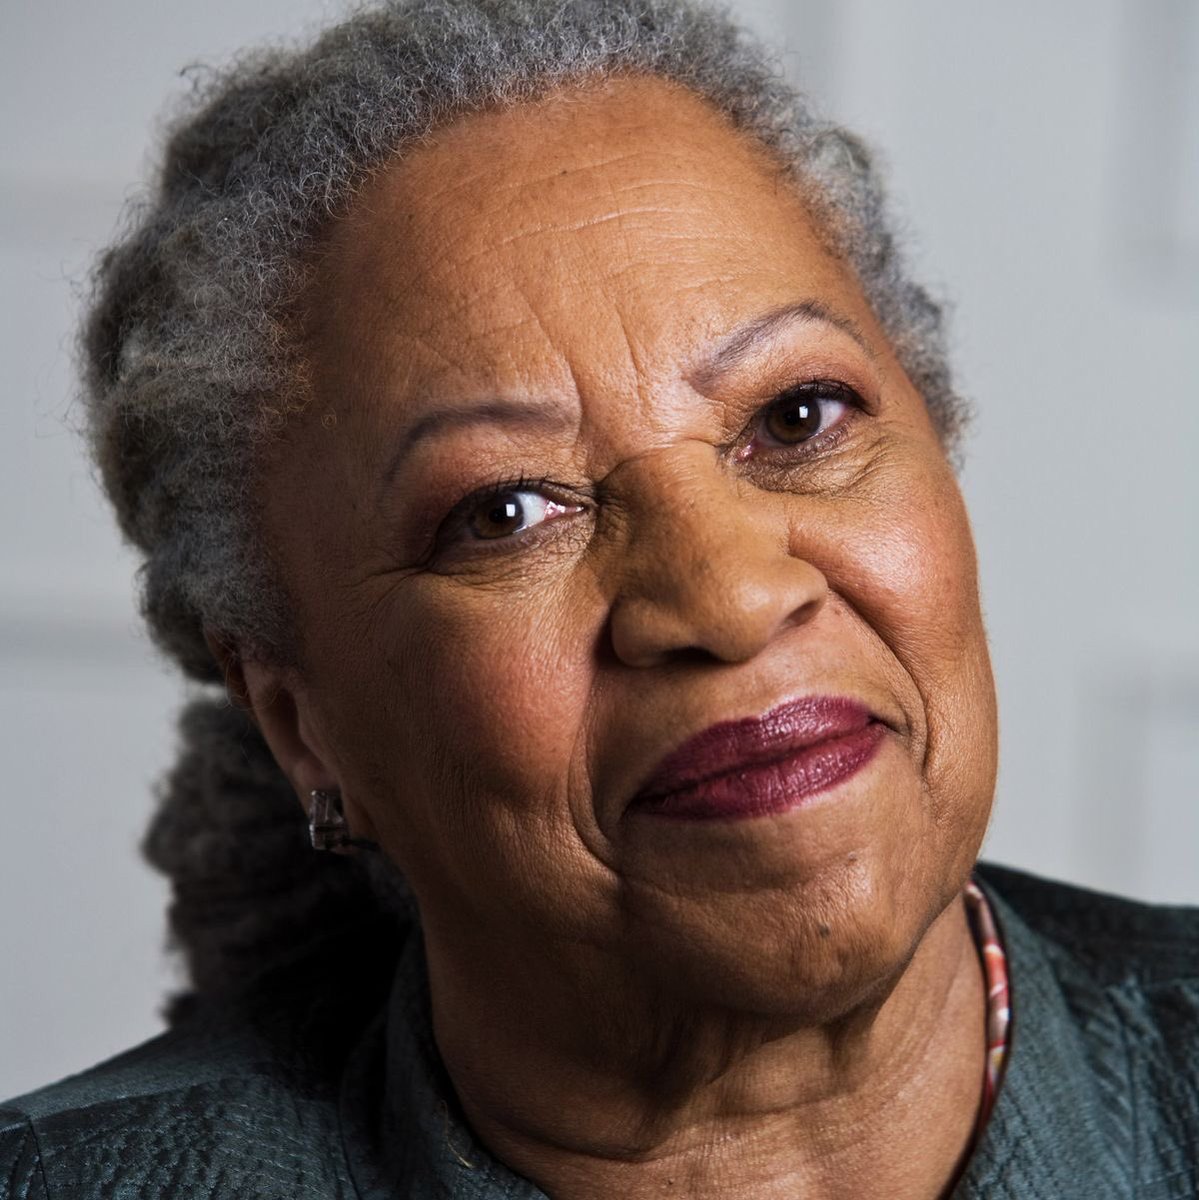 "... art takes us and makes us take a journey beyond price, beyond cost, into bearing witness to the world as it is and as it should be. Art invites us to know beauty and to solicit it, summon it, from even the most tragic of circumstances."     ~ Toni Morrison